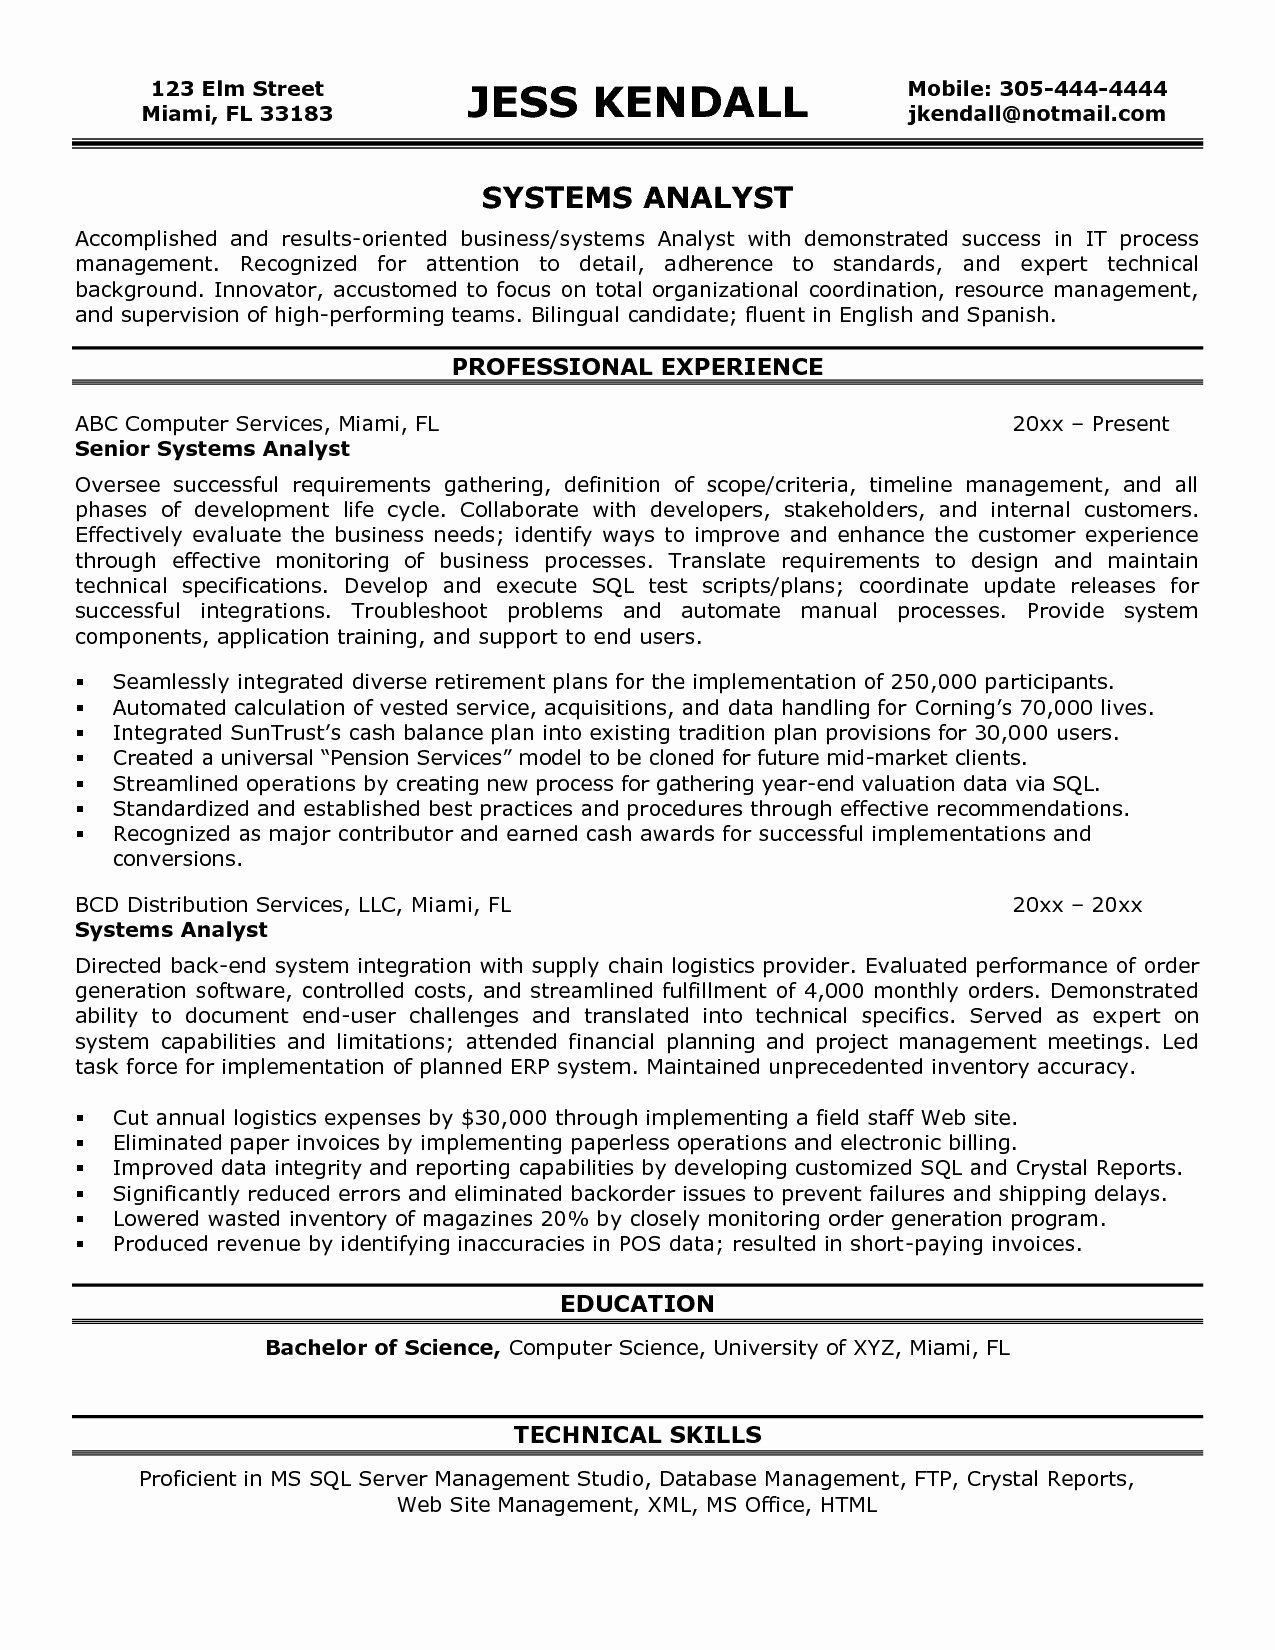 Business Systems Analyst Resume Template